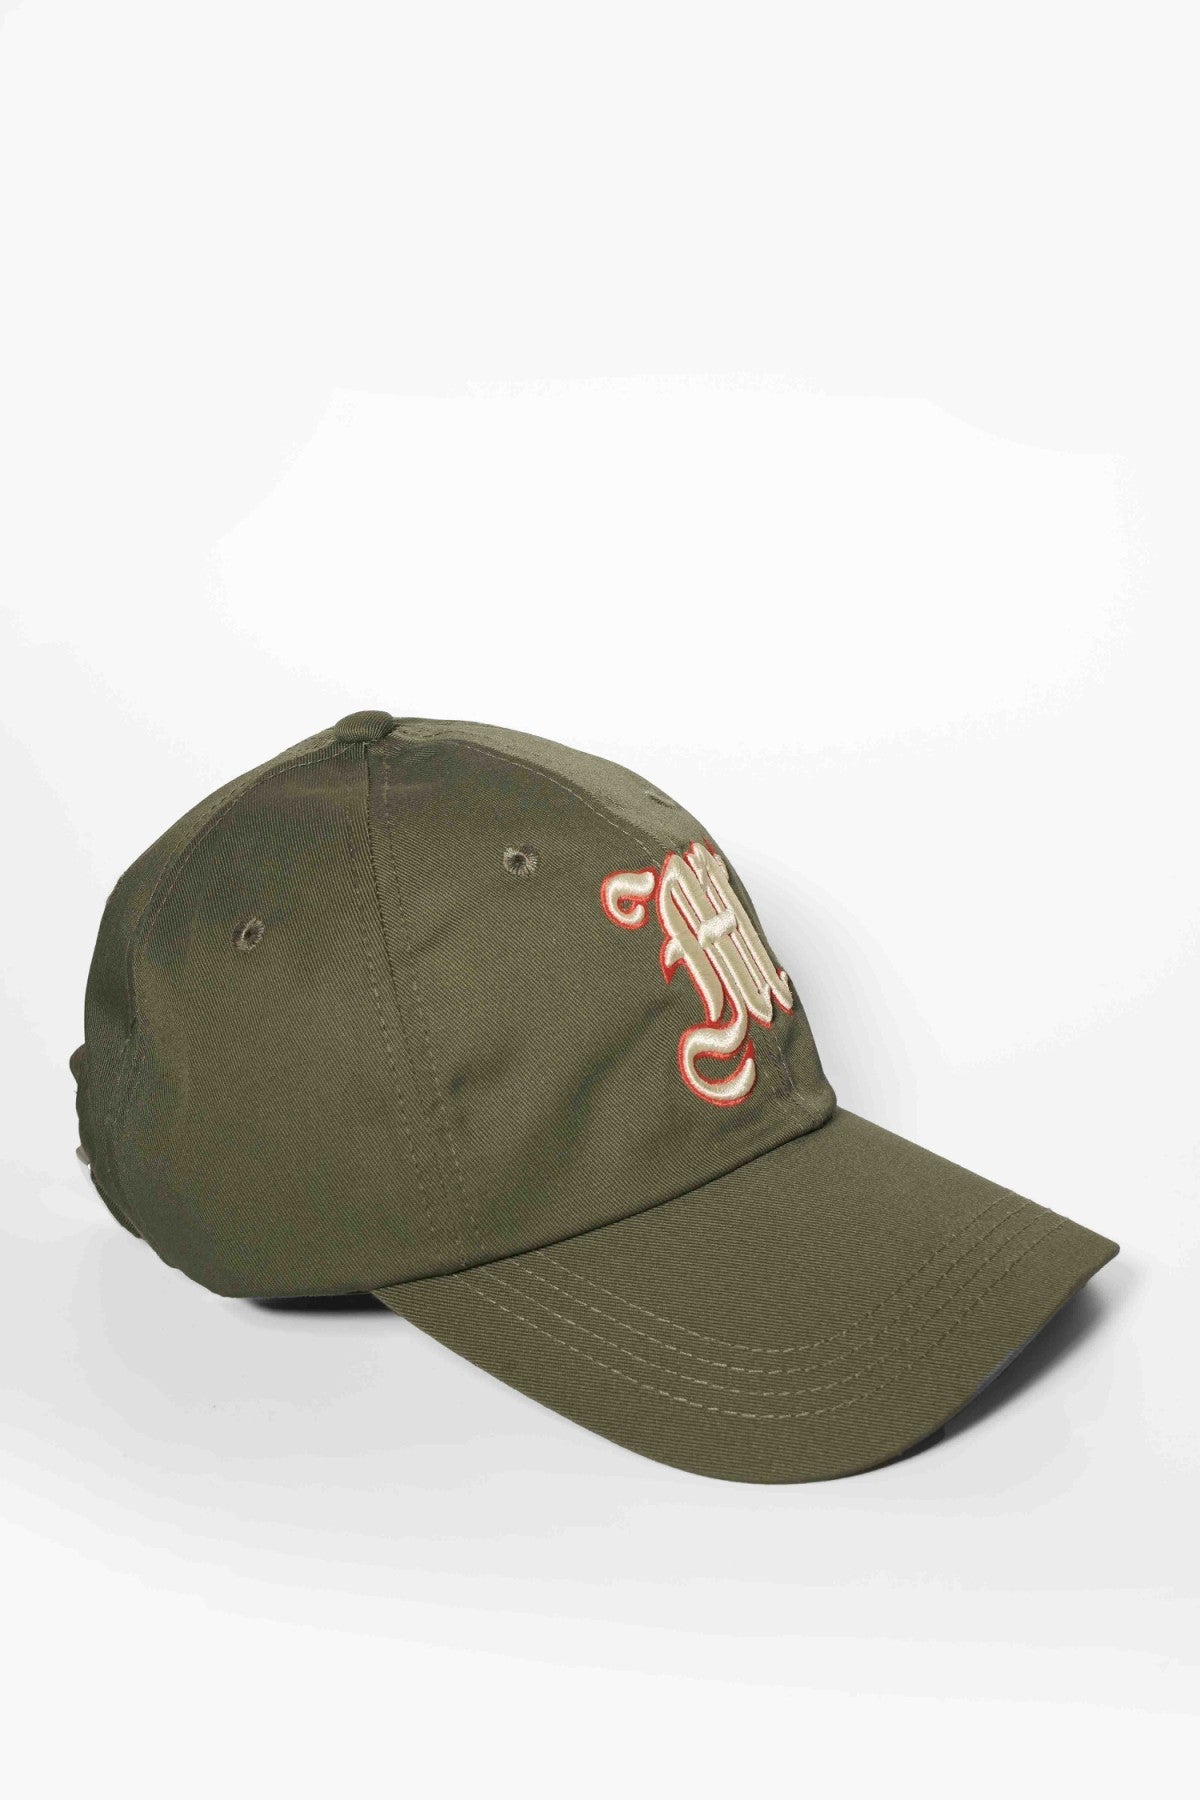 Mossimo Olive Baseball Cap with Embossed Embroidery - Mossimo PH